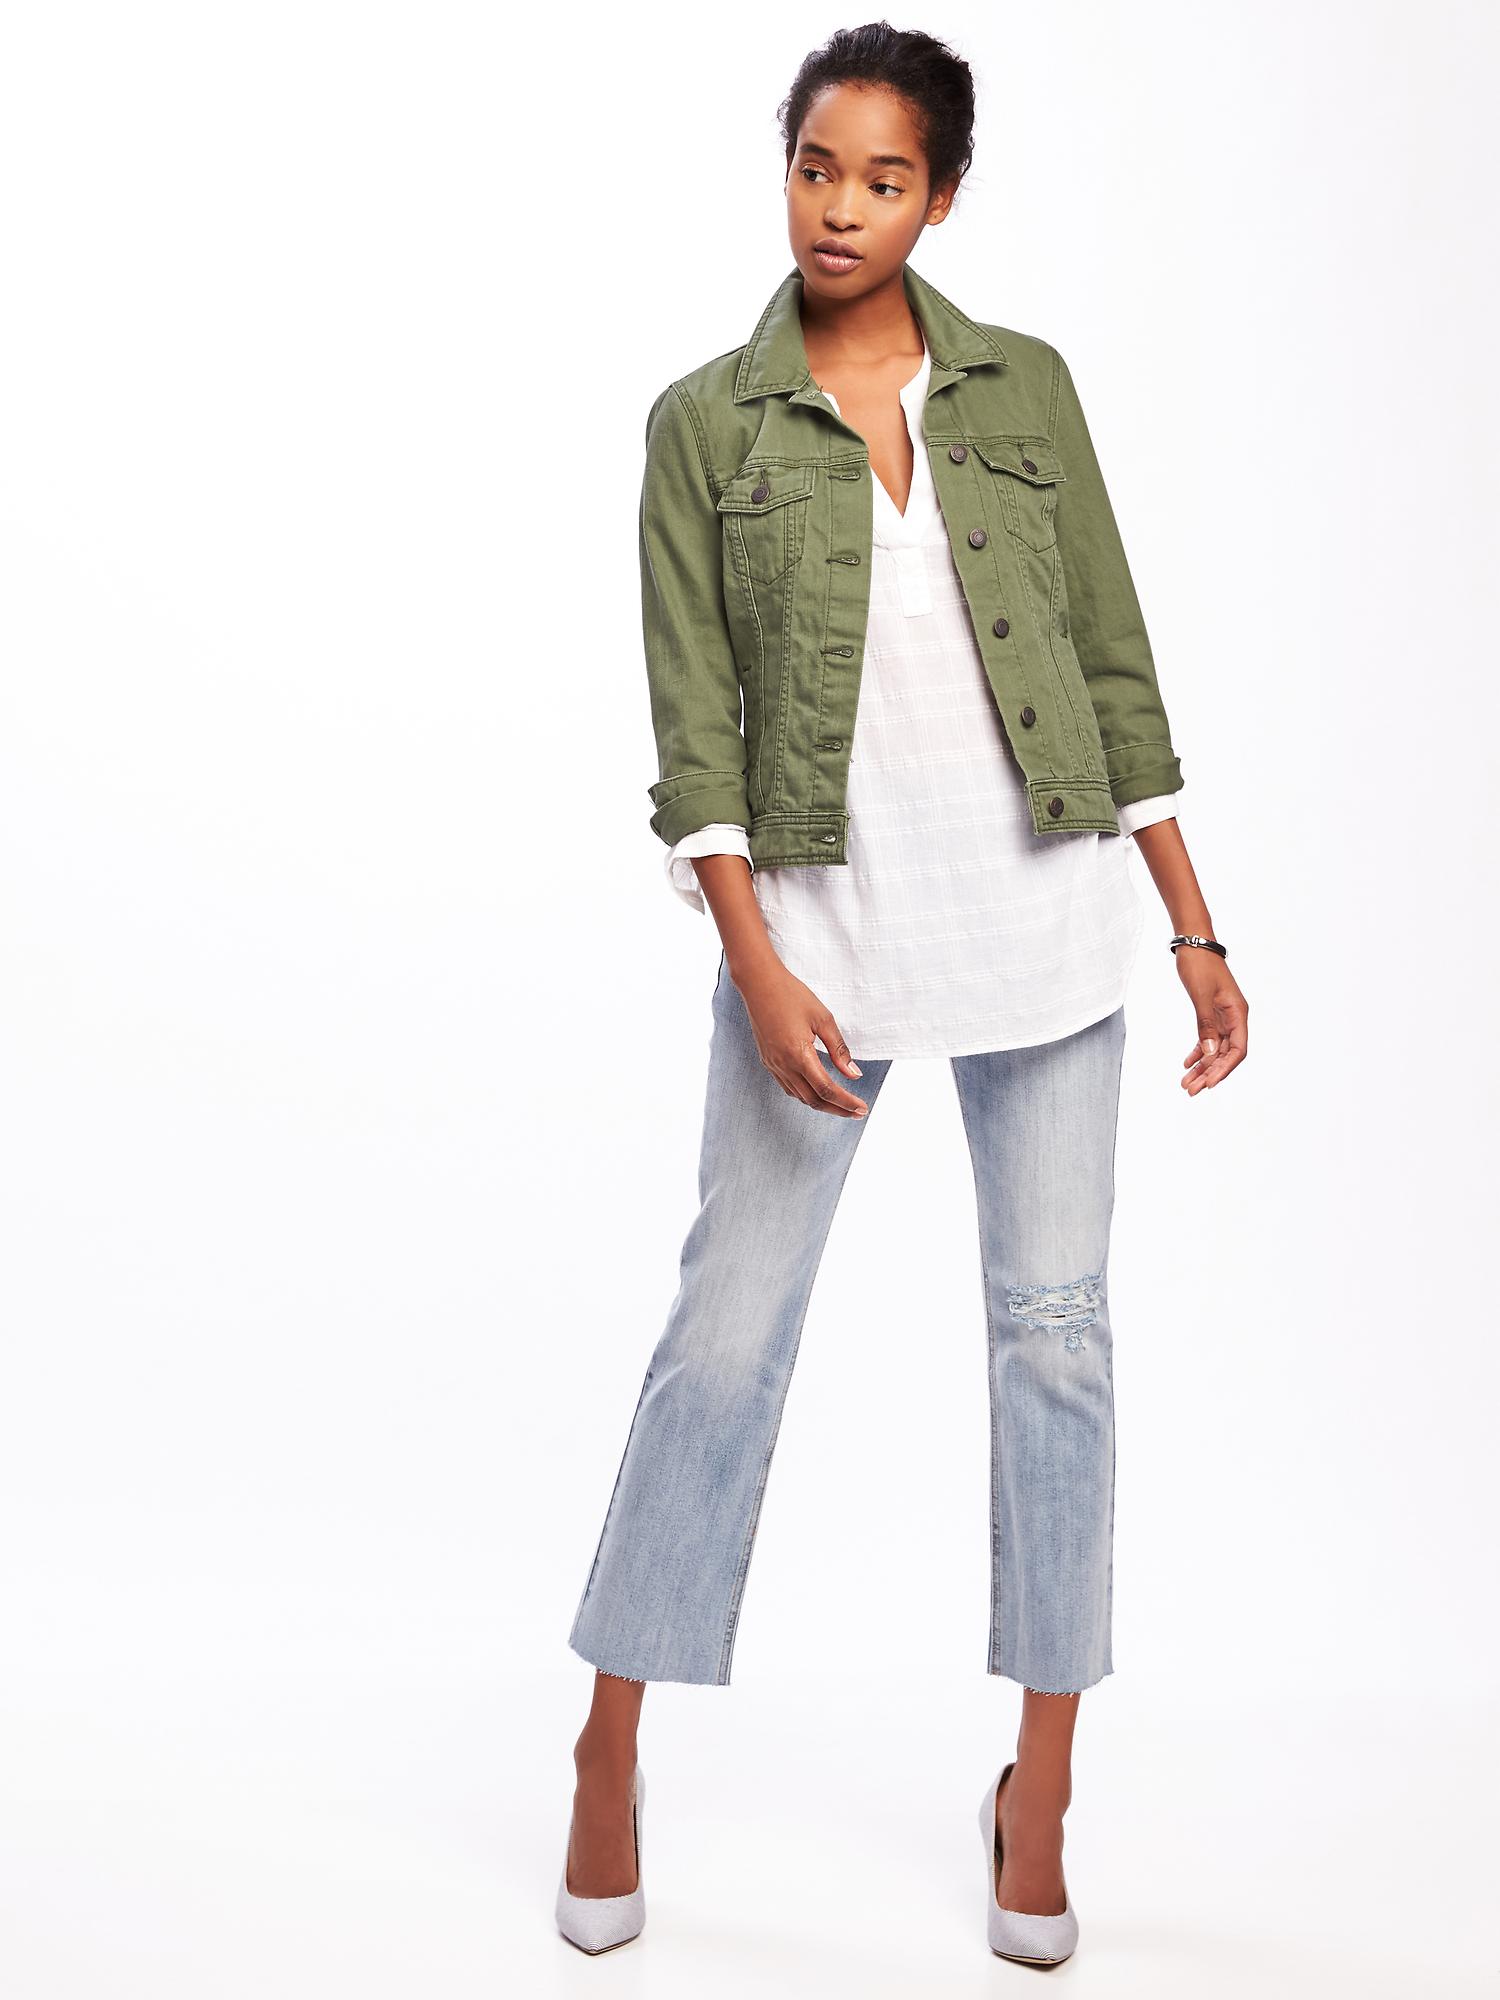 olive green skinnt jeans outfit long denim jacket white tee — bows & sequins